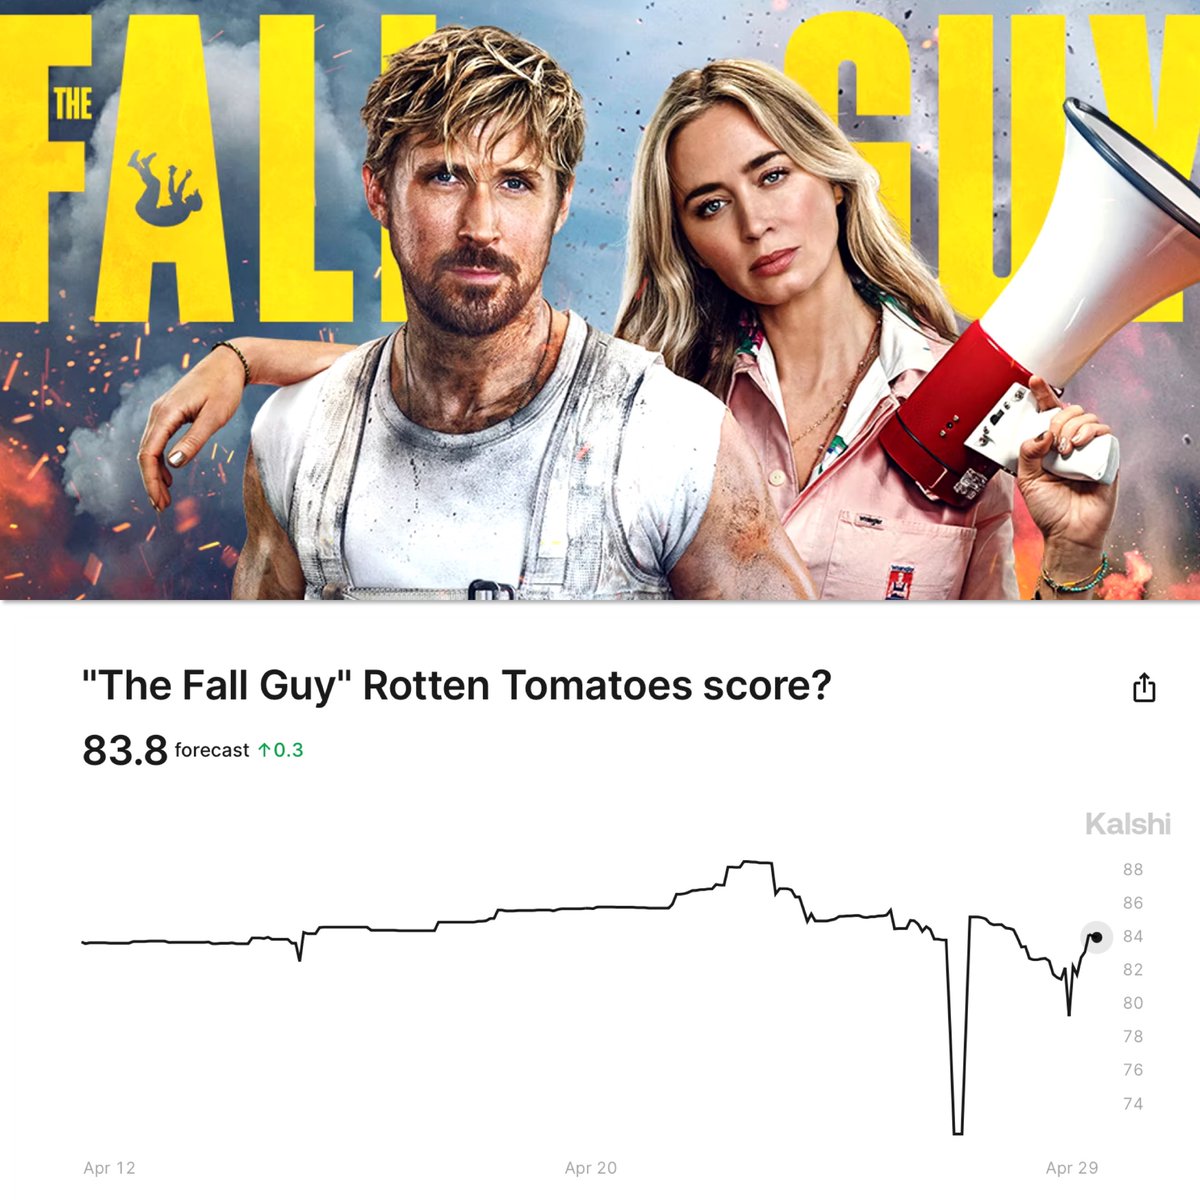 For the last 14 years, Marvel has occupied the box office the first week of May. That changes this weekend with the release of #TheFallGuy, which is one of my most anticipated films of 2024. Traders @Kalshi are predicting The Fall Guy will have a Rotten Tomatoes score of 83.8,…